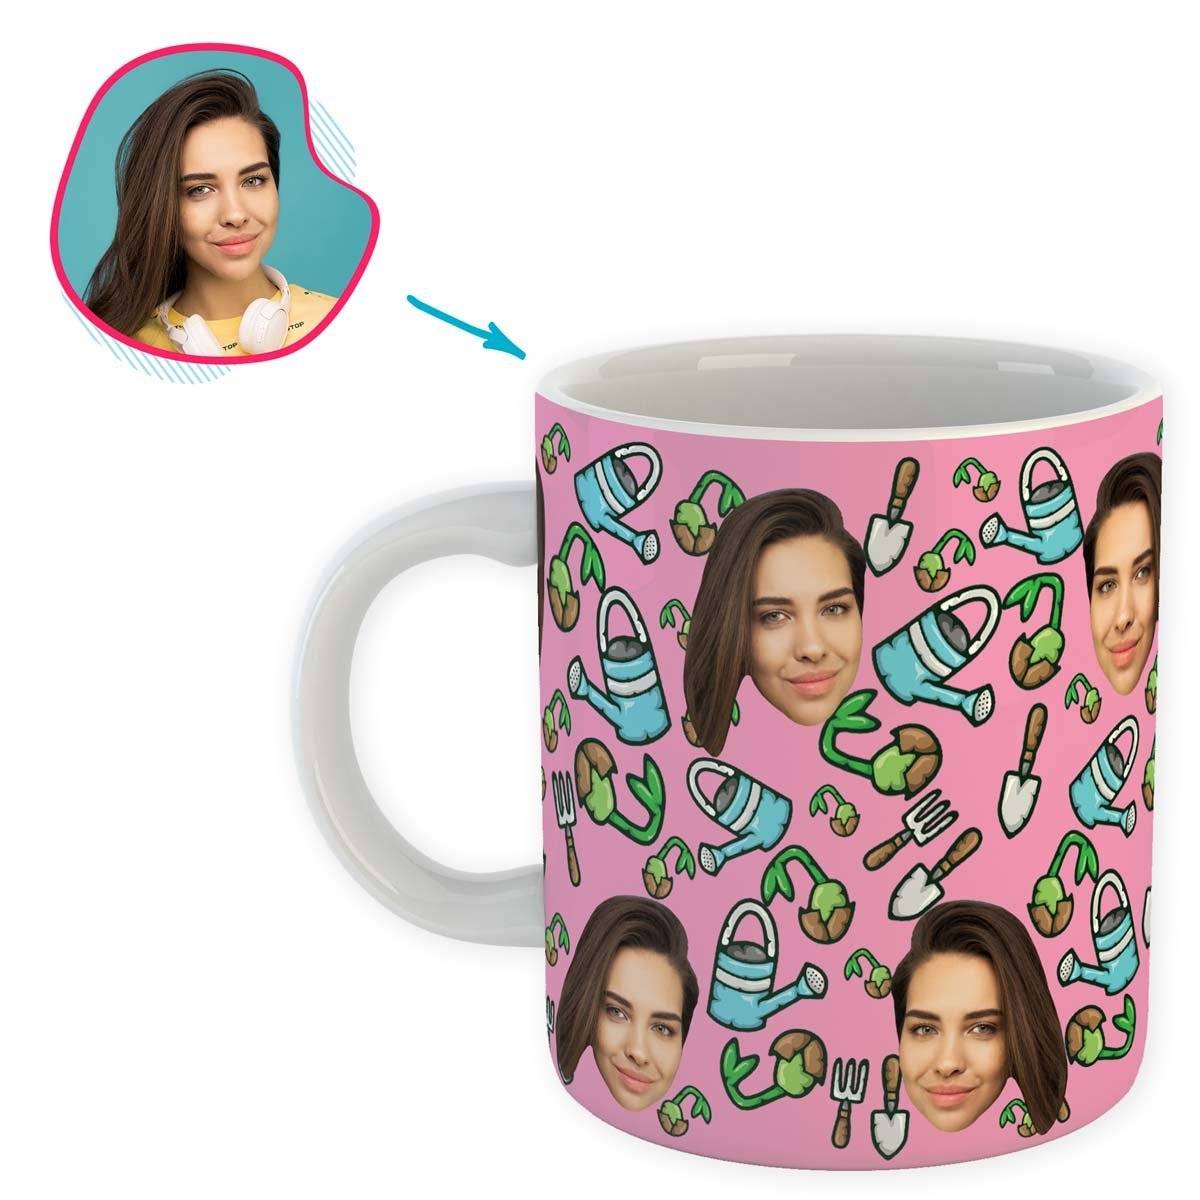 pink Gardening mug personalized with photo of face printed on it